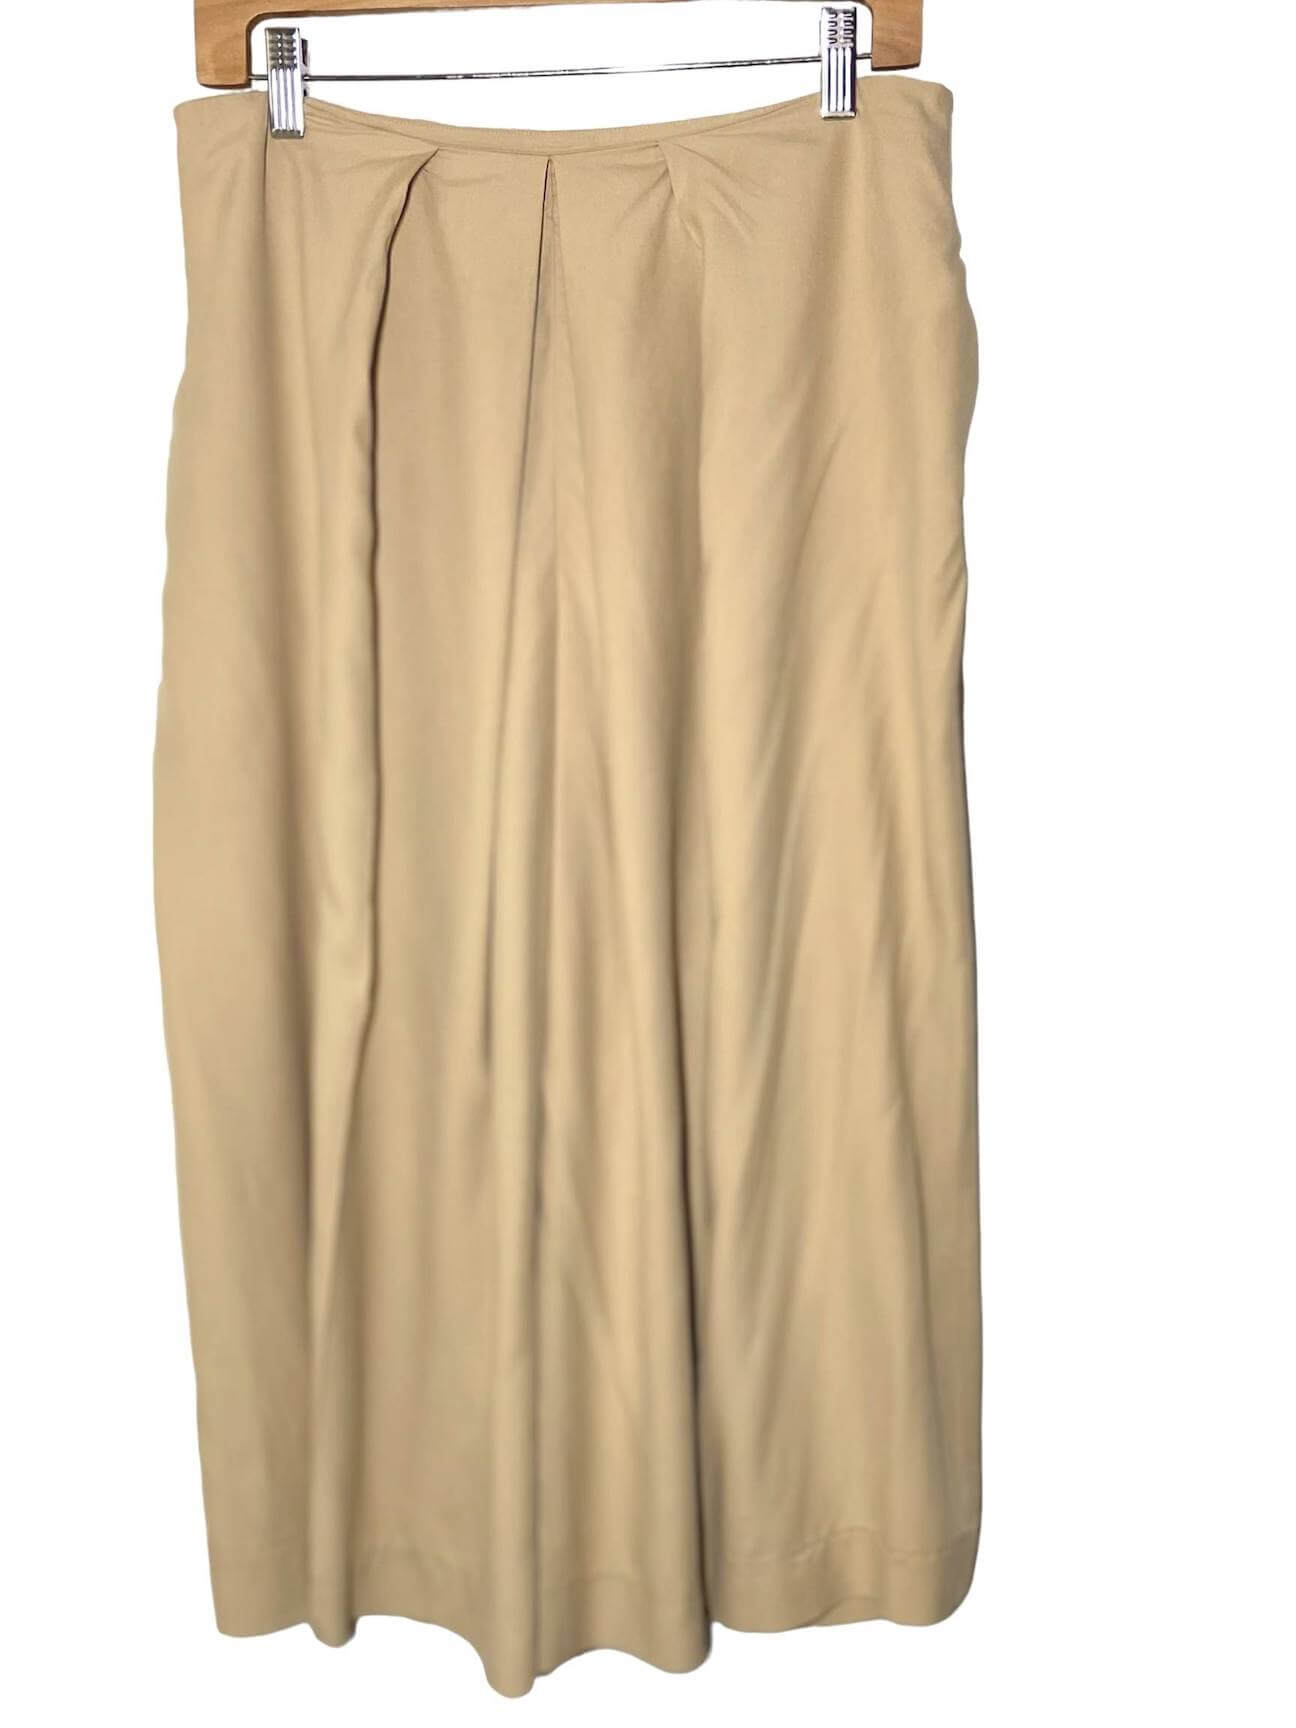 Bright Spring BROOKS BROTHERS beige palazzo trousers